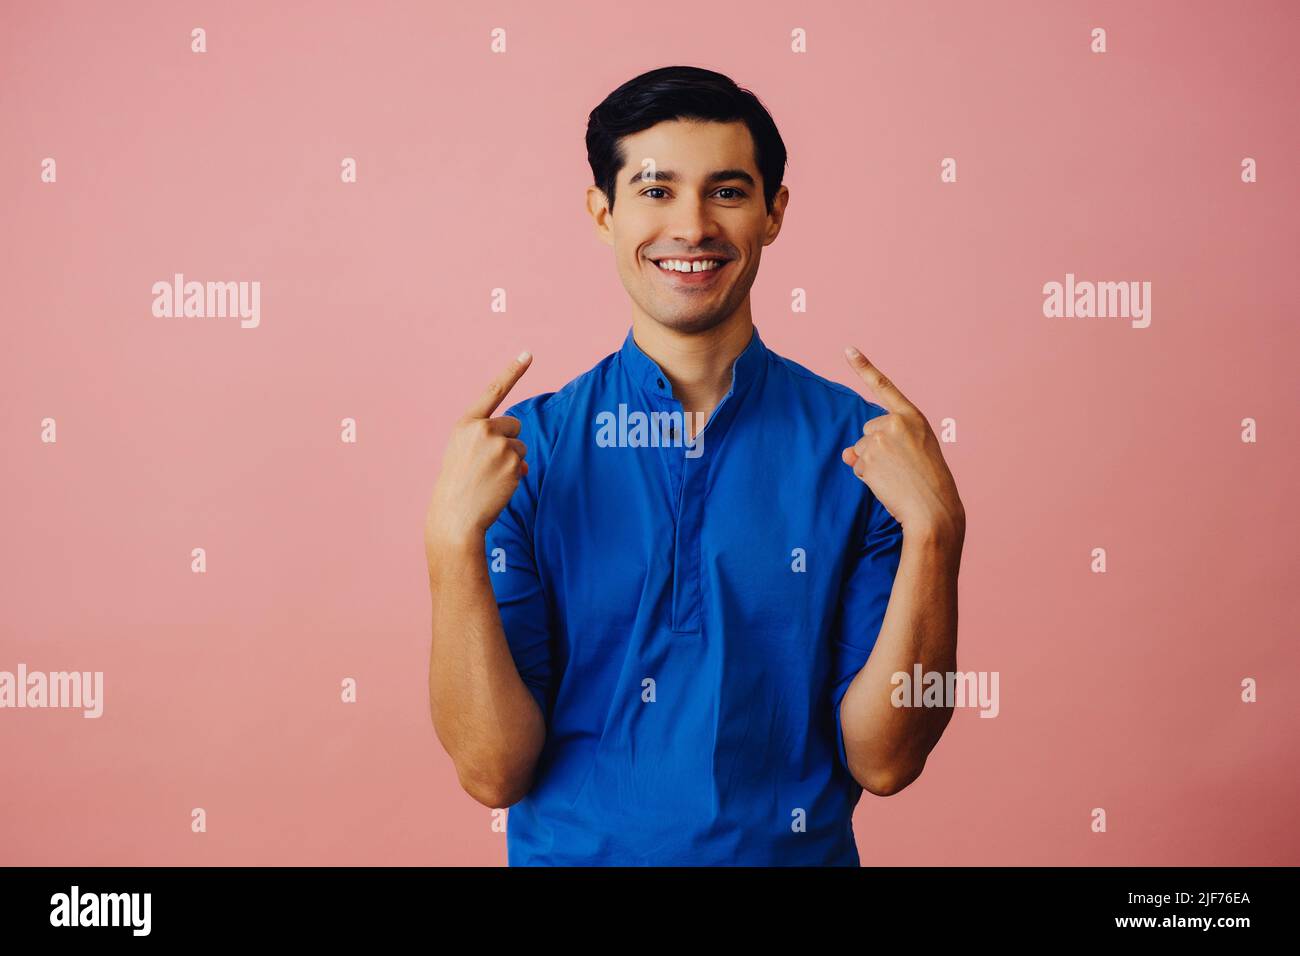 Portrait hispanic latino man with arms crossed pointing at himself black hair smiling handsome young adult blue shirt over pink background looking at camera studio shot Stock Photo